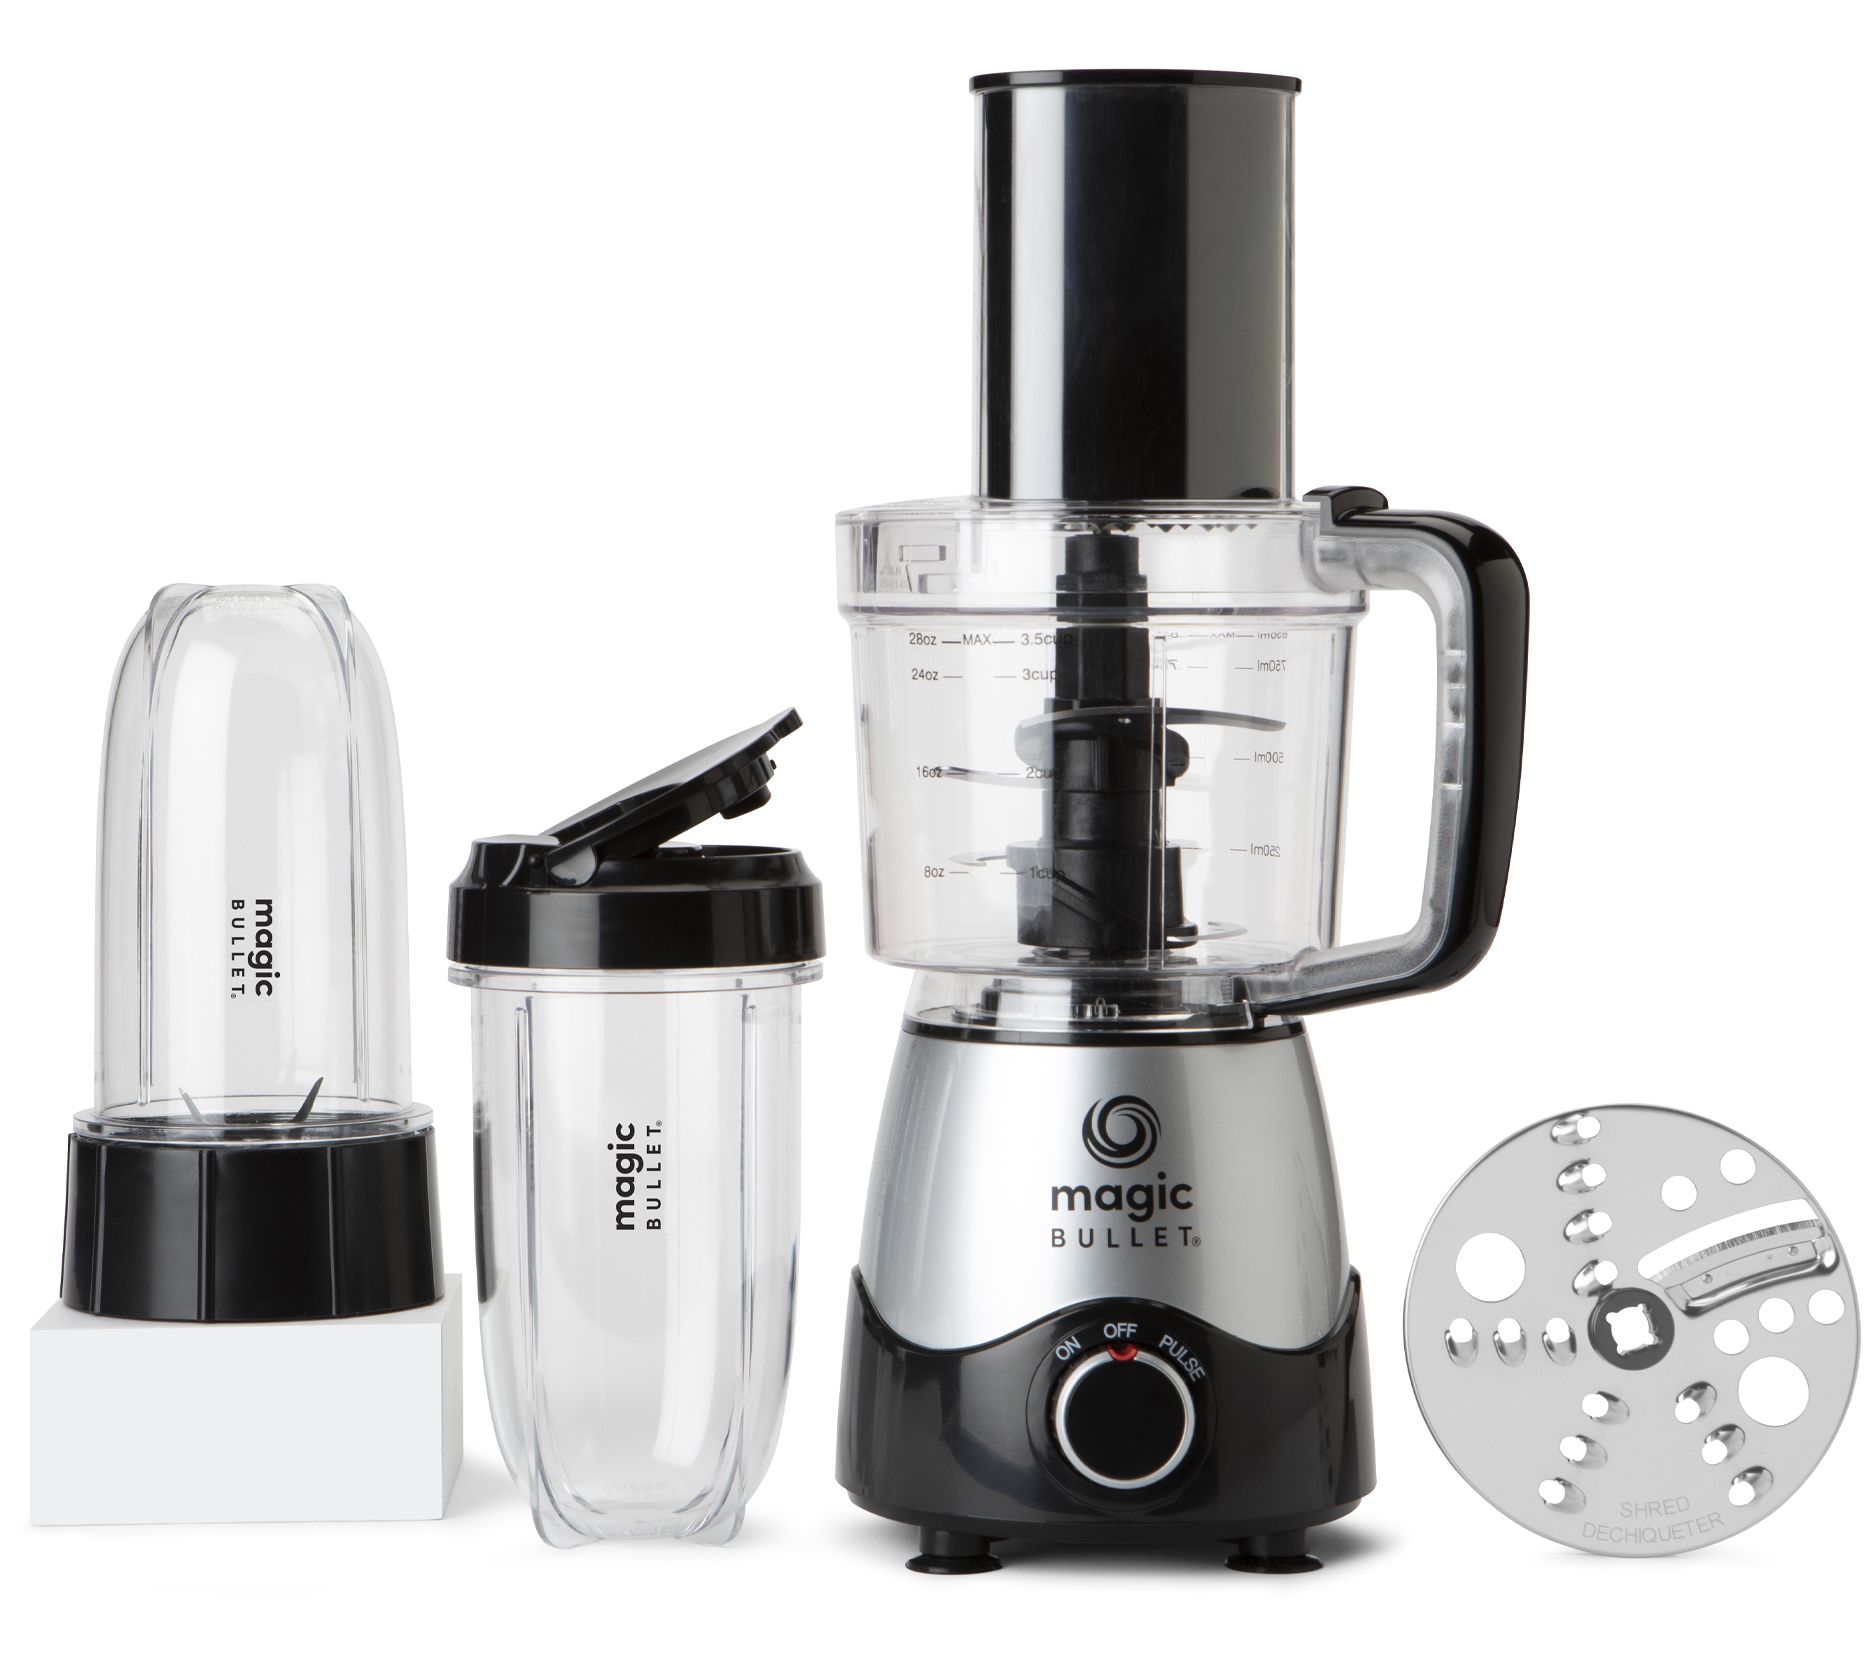 NutriBullet Magic Bullet with Feed Chute 